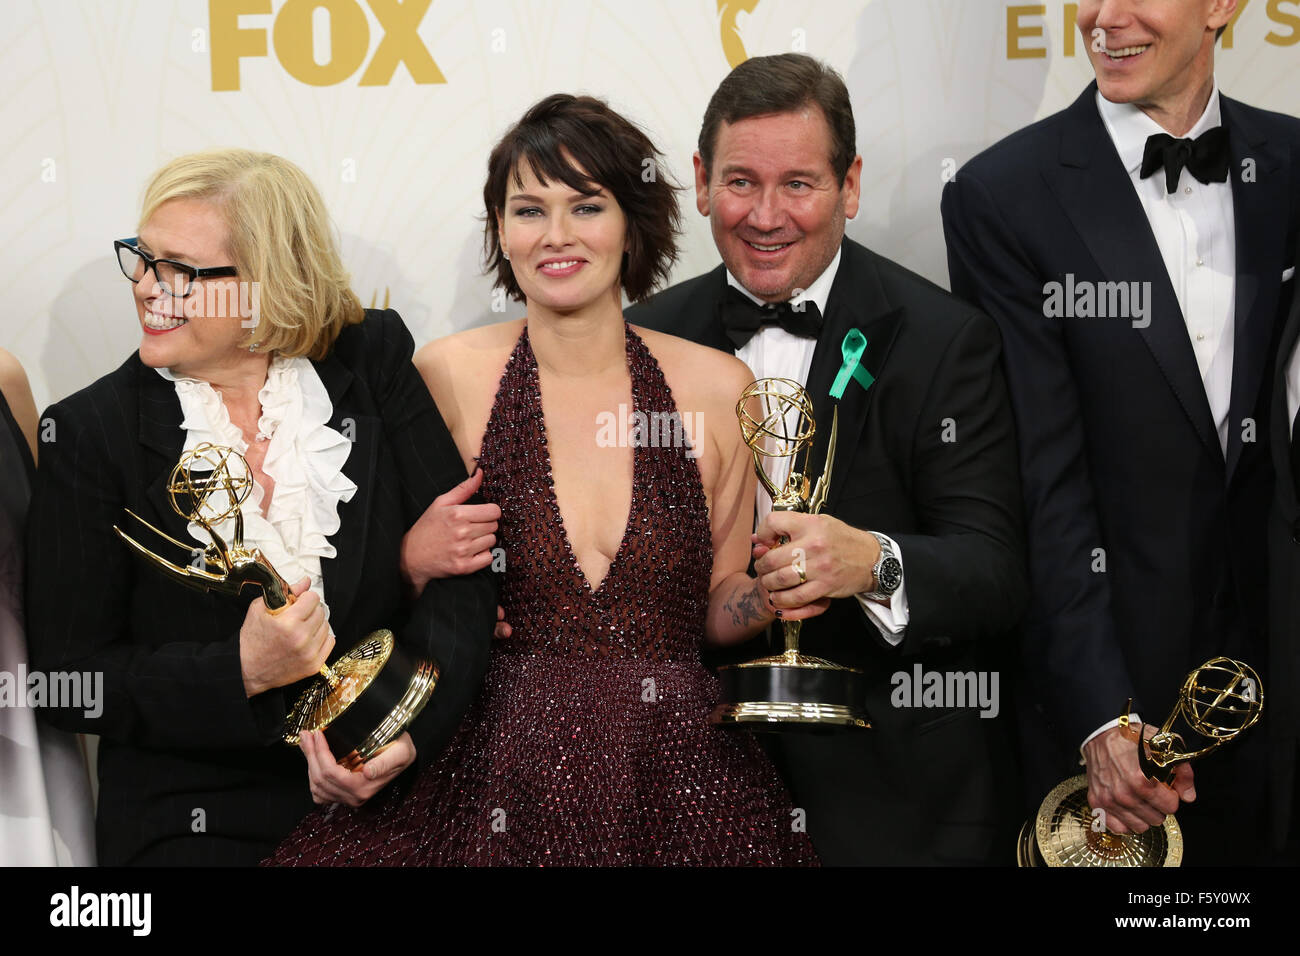 67th Annual Primetime Emmy Awards at Microsoft Theater - Press Room  Featuring: D. B. Weiss, Lena Headey, David Nutter Where: Los Angeles, California, United States When: 20 Sep 2015 Stock Photo